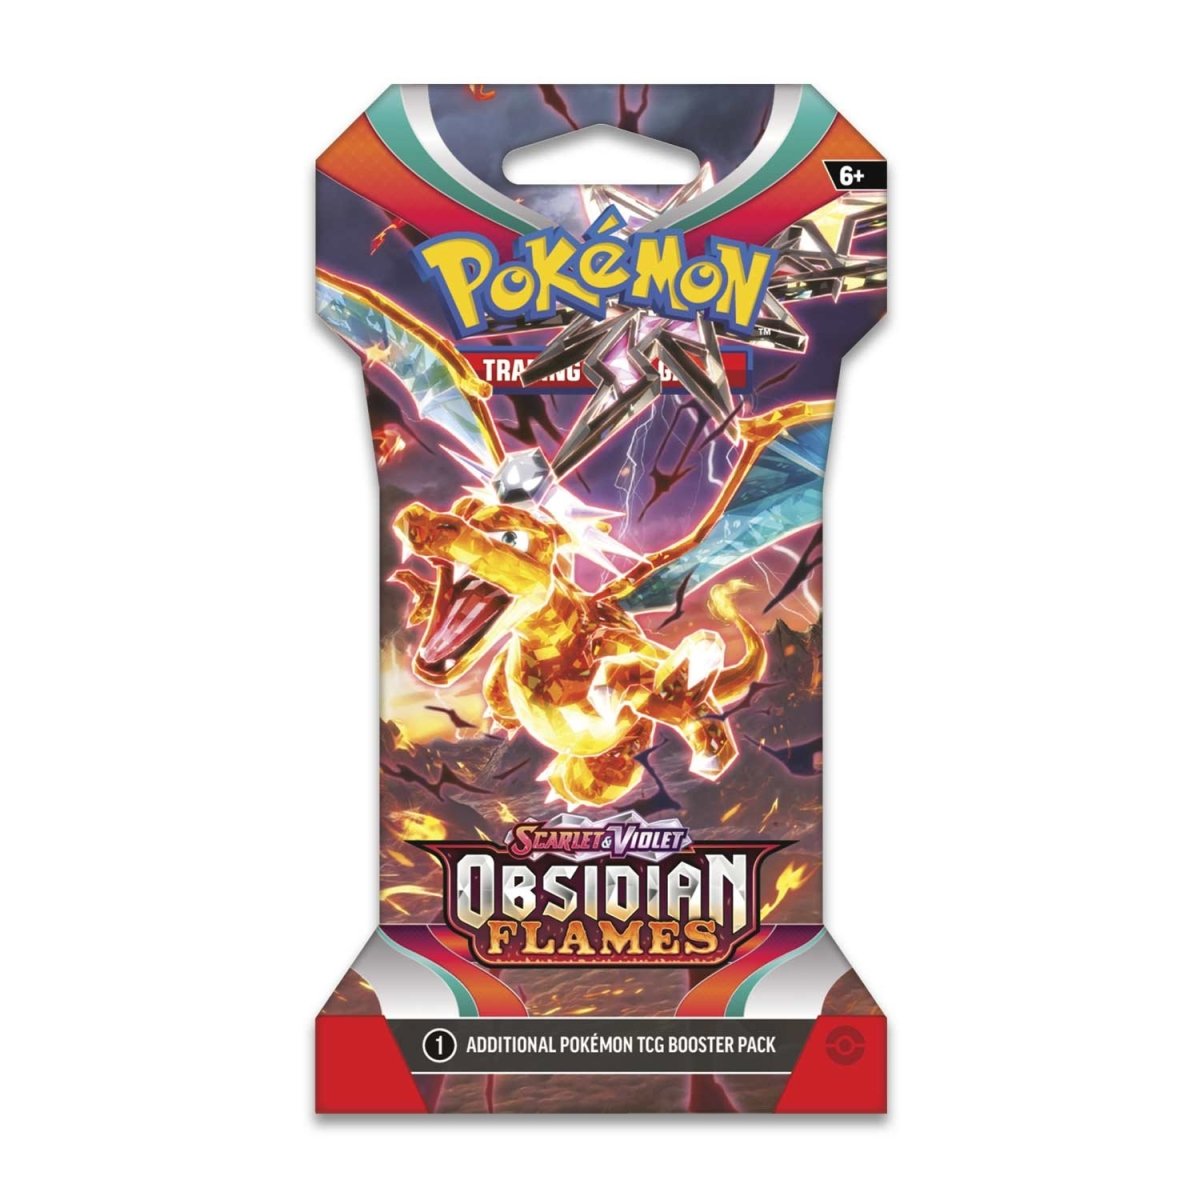 Image of the Pokémon TCG: Scarlet & Violet—Obsidian Flames Sleeved Booster Pack. The pack is enveloped by vibrant imagery of Charizard ex and other captivating Pokémon. This booster pack includes 10 cards and 1 Basic Energy, ready to expand your deck.